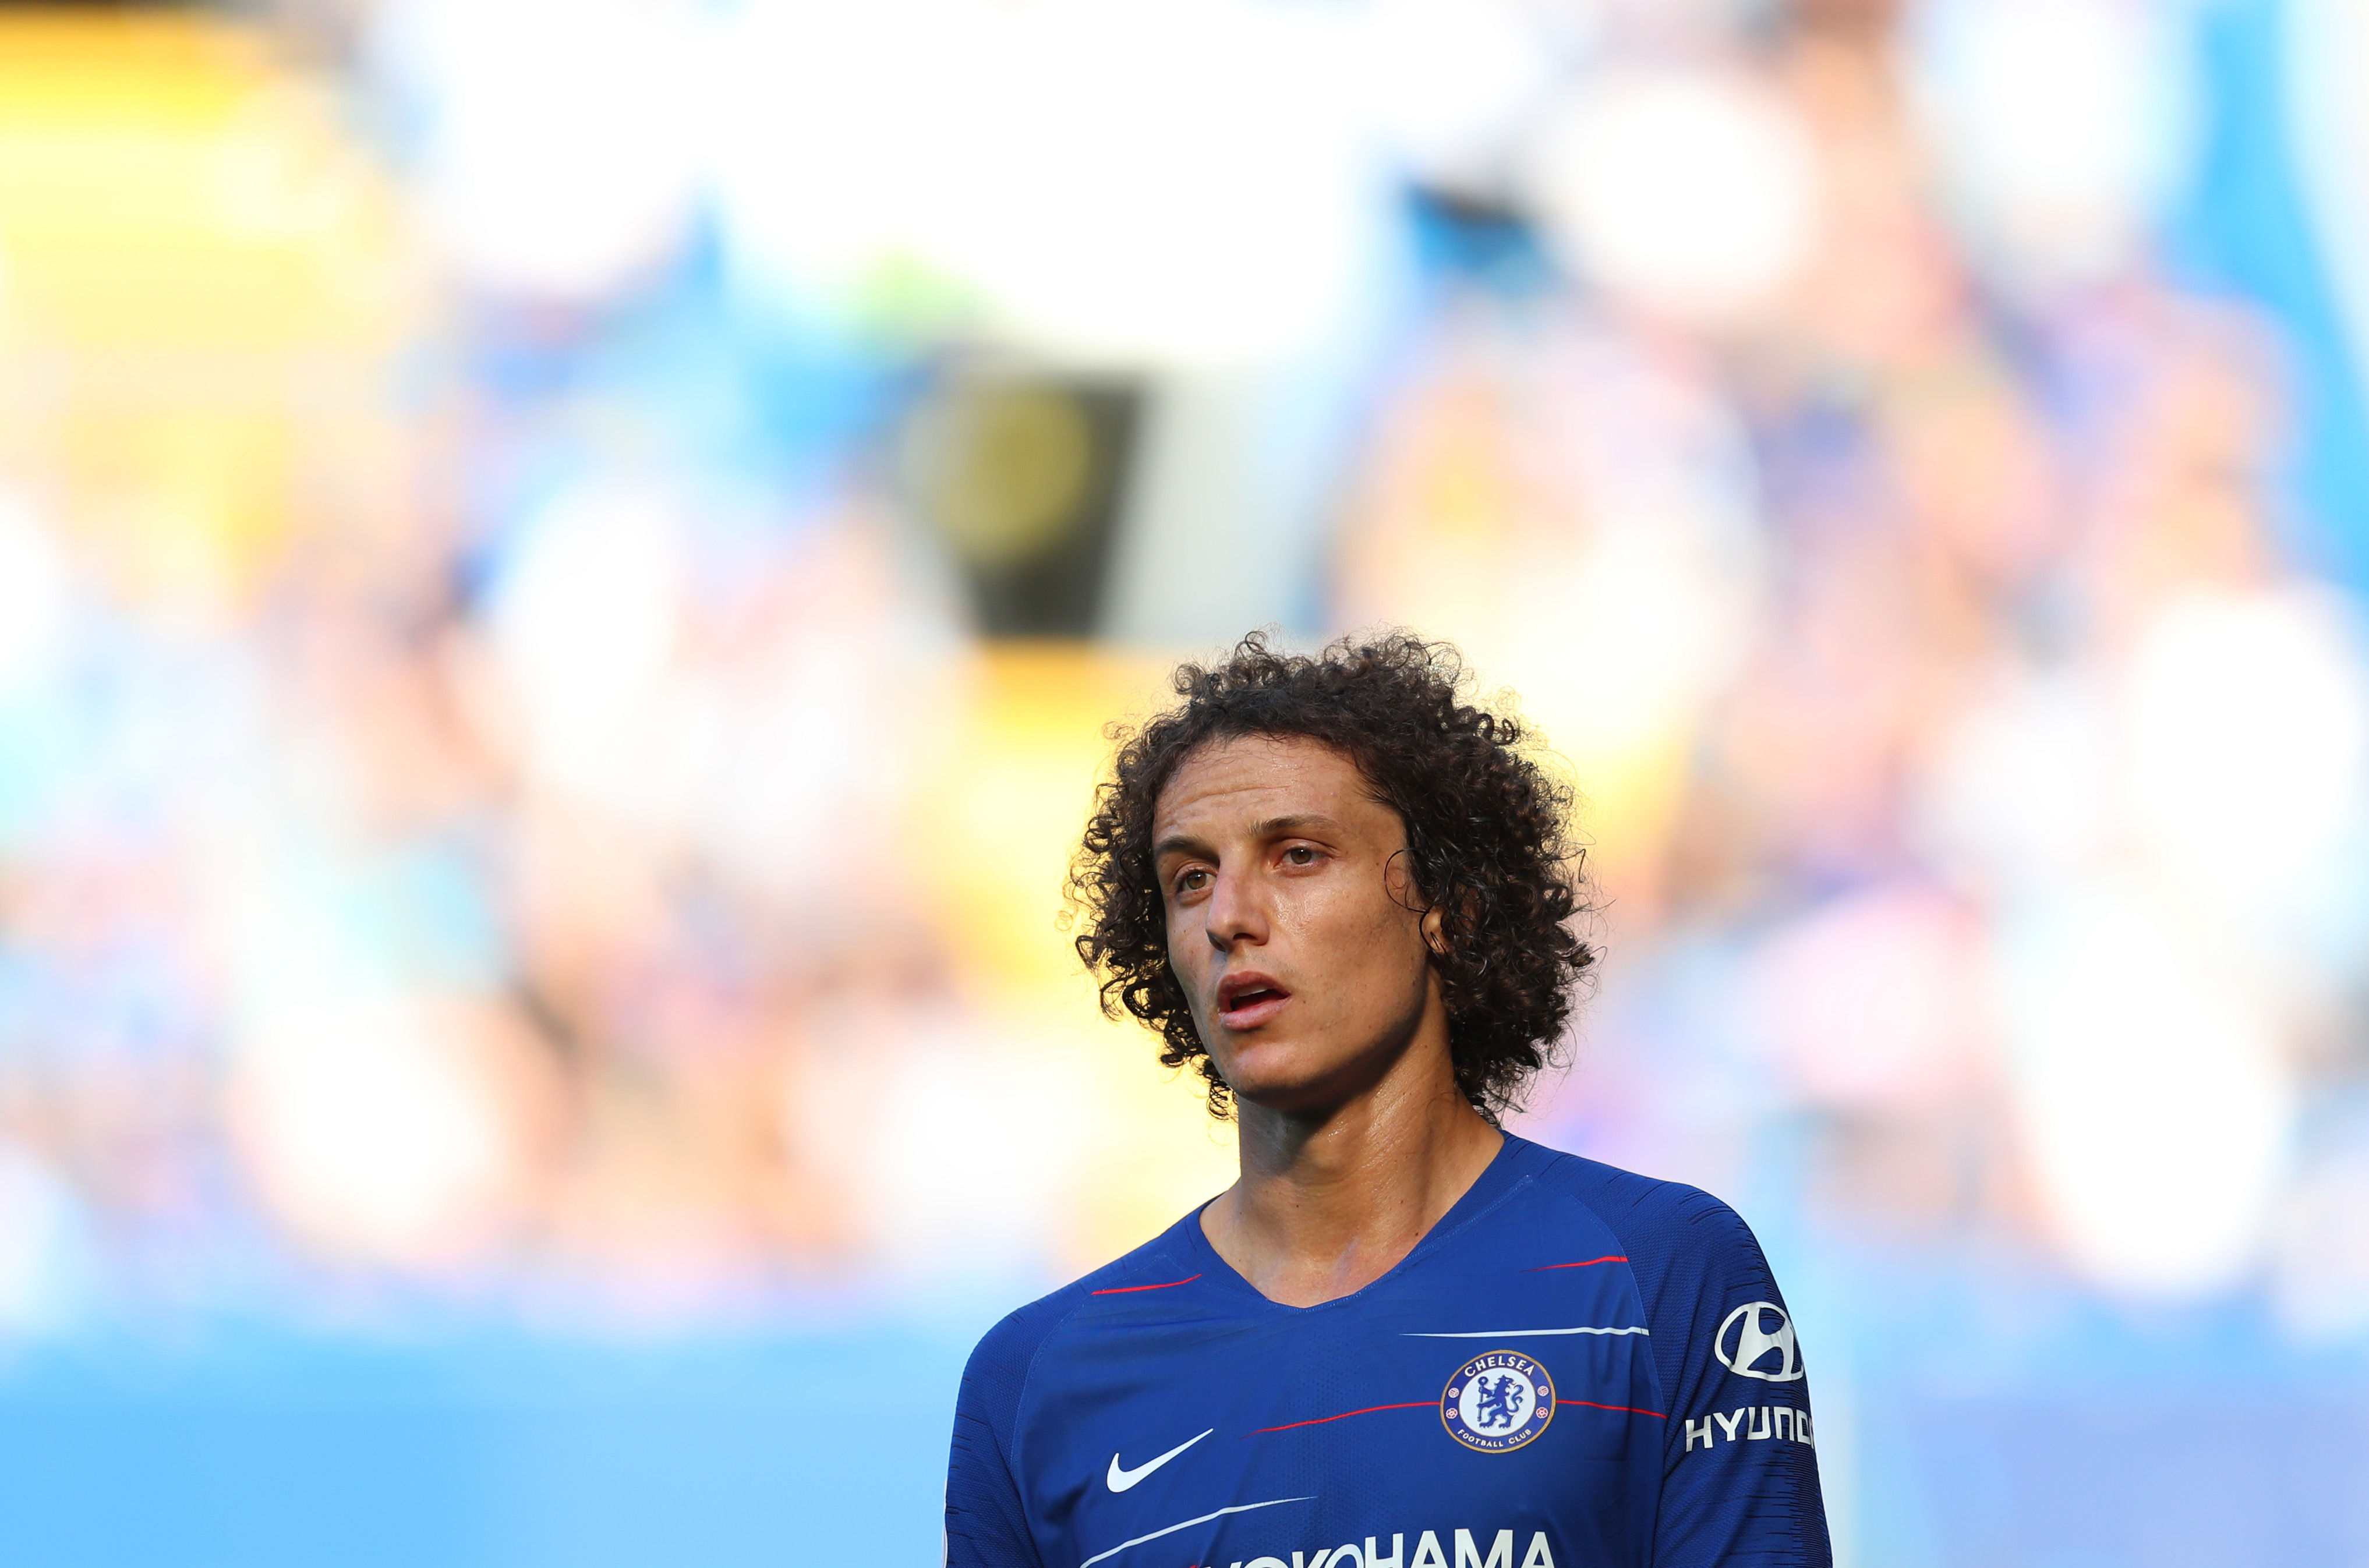 LONDON, ENGLAND - SEPTEMBER 01: David Luiz of Chelsea during the Premier League match between Chelsea FC and AFC Bournemouth at Stamford Bridge on September 1, 2018 in London, United Kingdom. (Photo by Catherine Ivill/Getty Images)